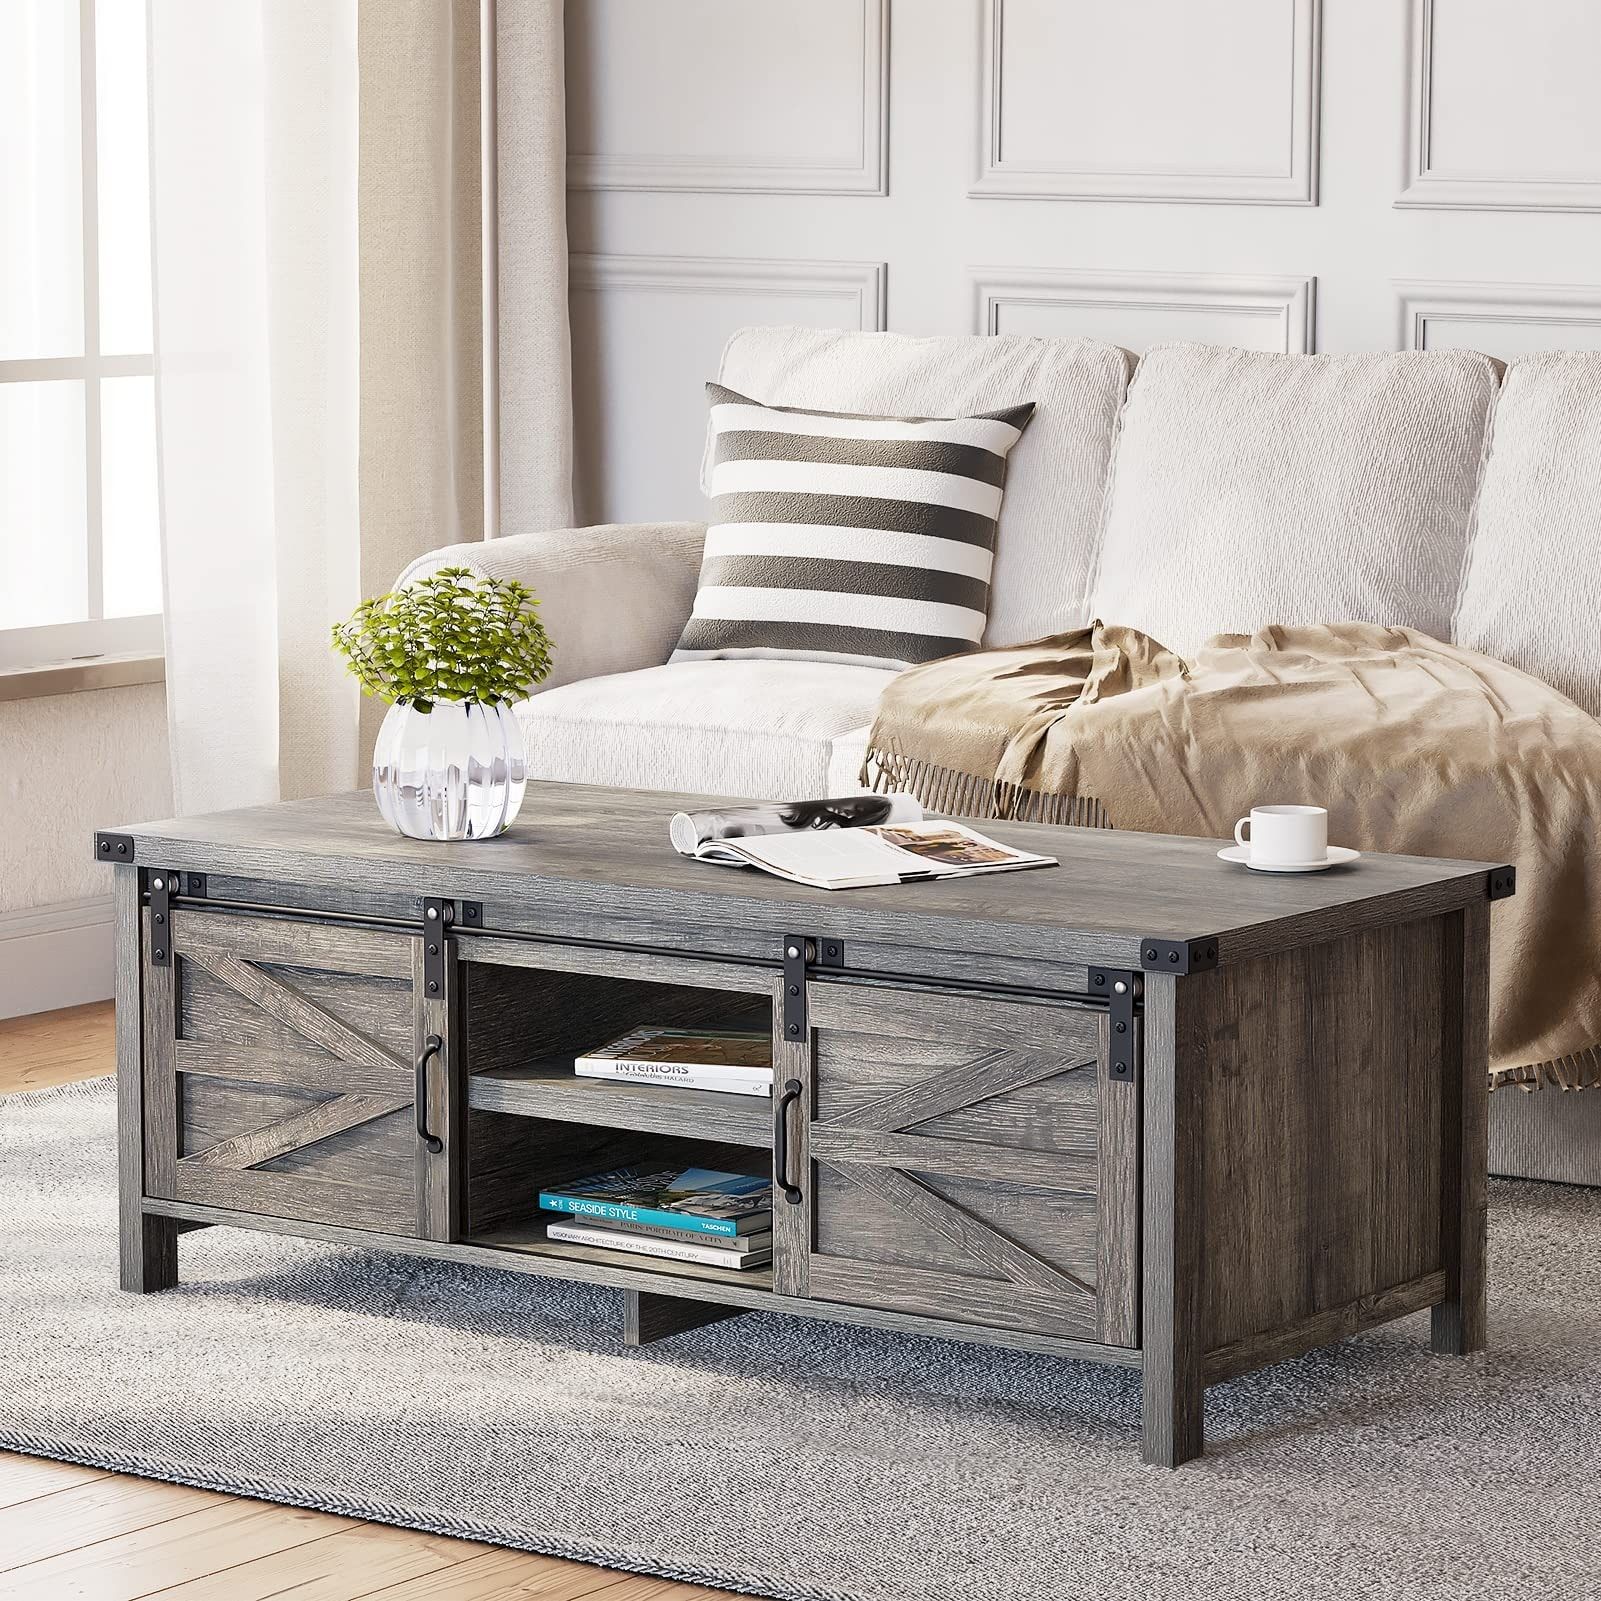 Farmhouse Coffee Table With Sliding Barn Doors & Storage, Grey Rustic  Wooden Center Rectangular Tables – Bed Bath & Beyond – 37841722 For Coffee Tables With Sliding Barn Doors (View 3 of 15)